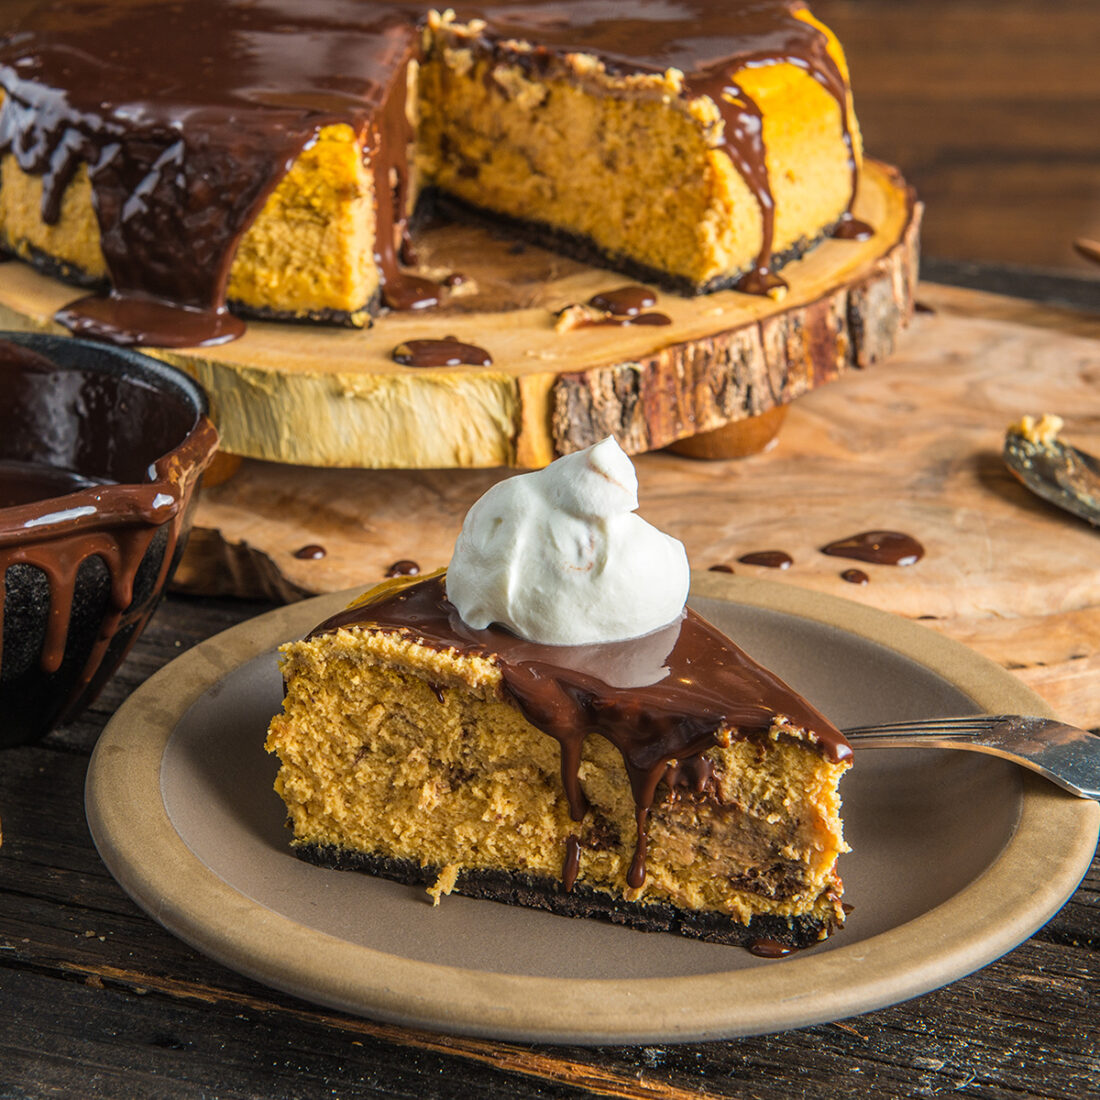 20170917 Baked Pumpkin Cheesecake with Chocolate Cookie Crust IN